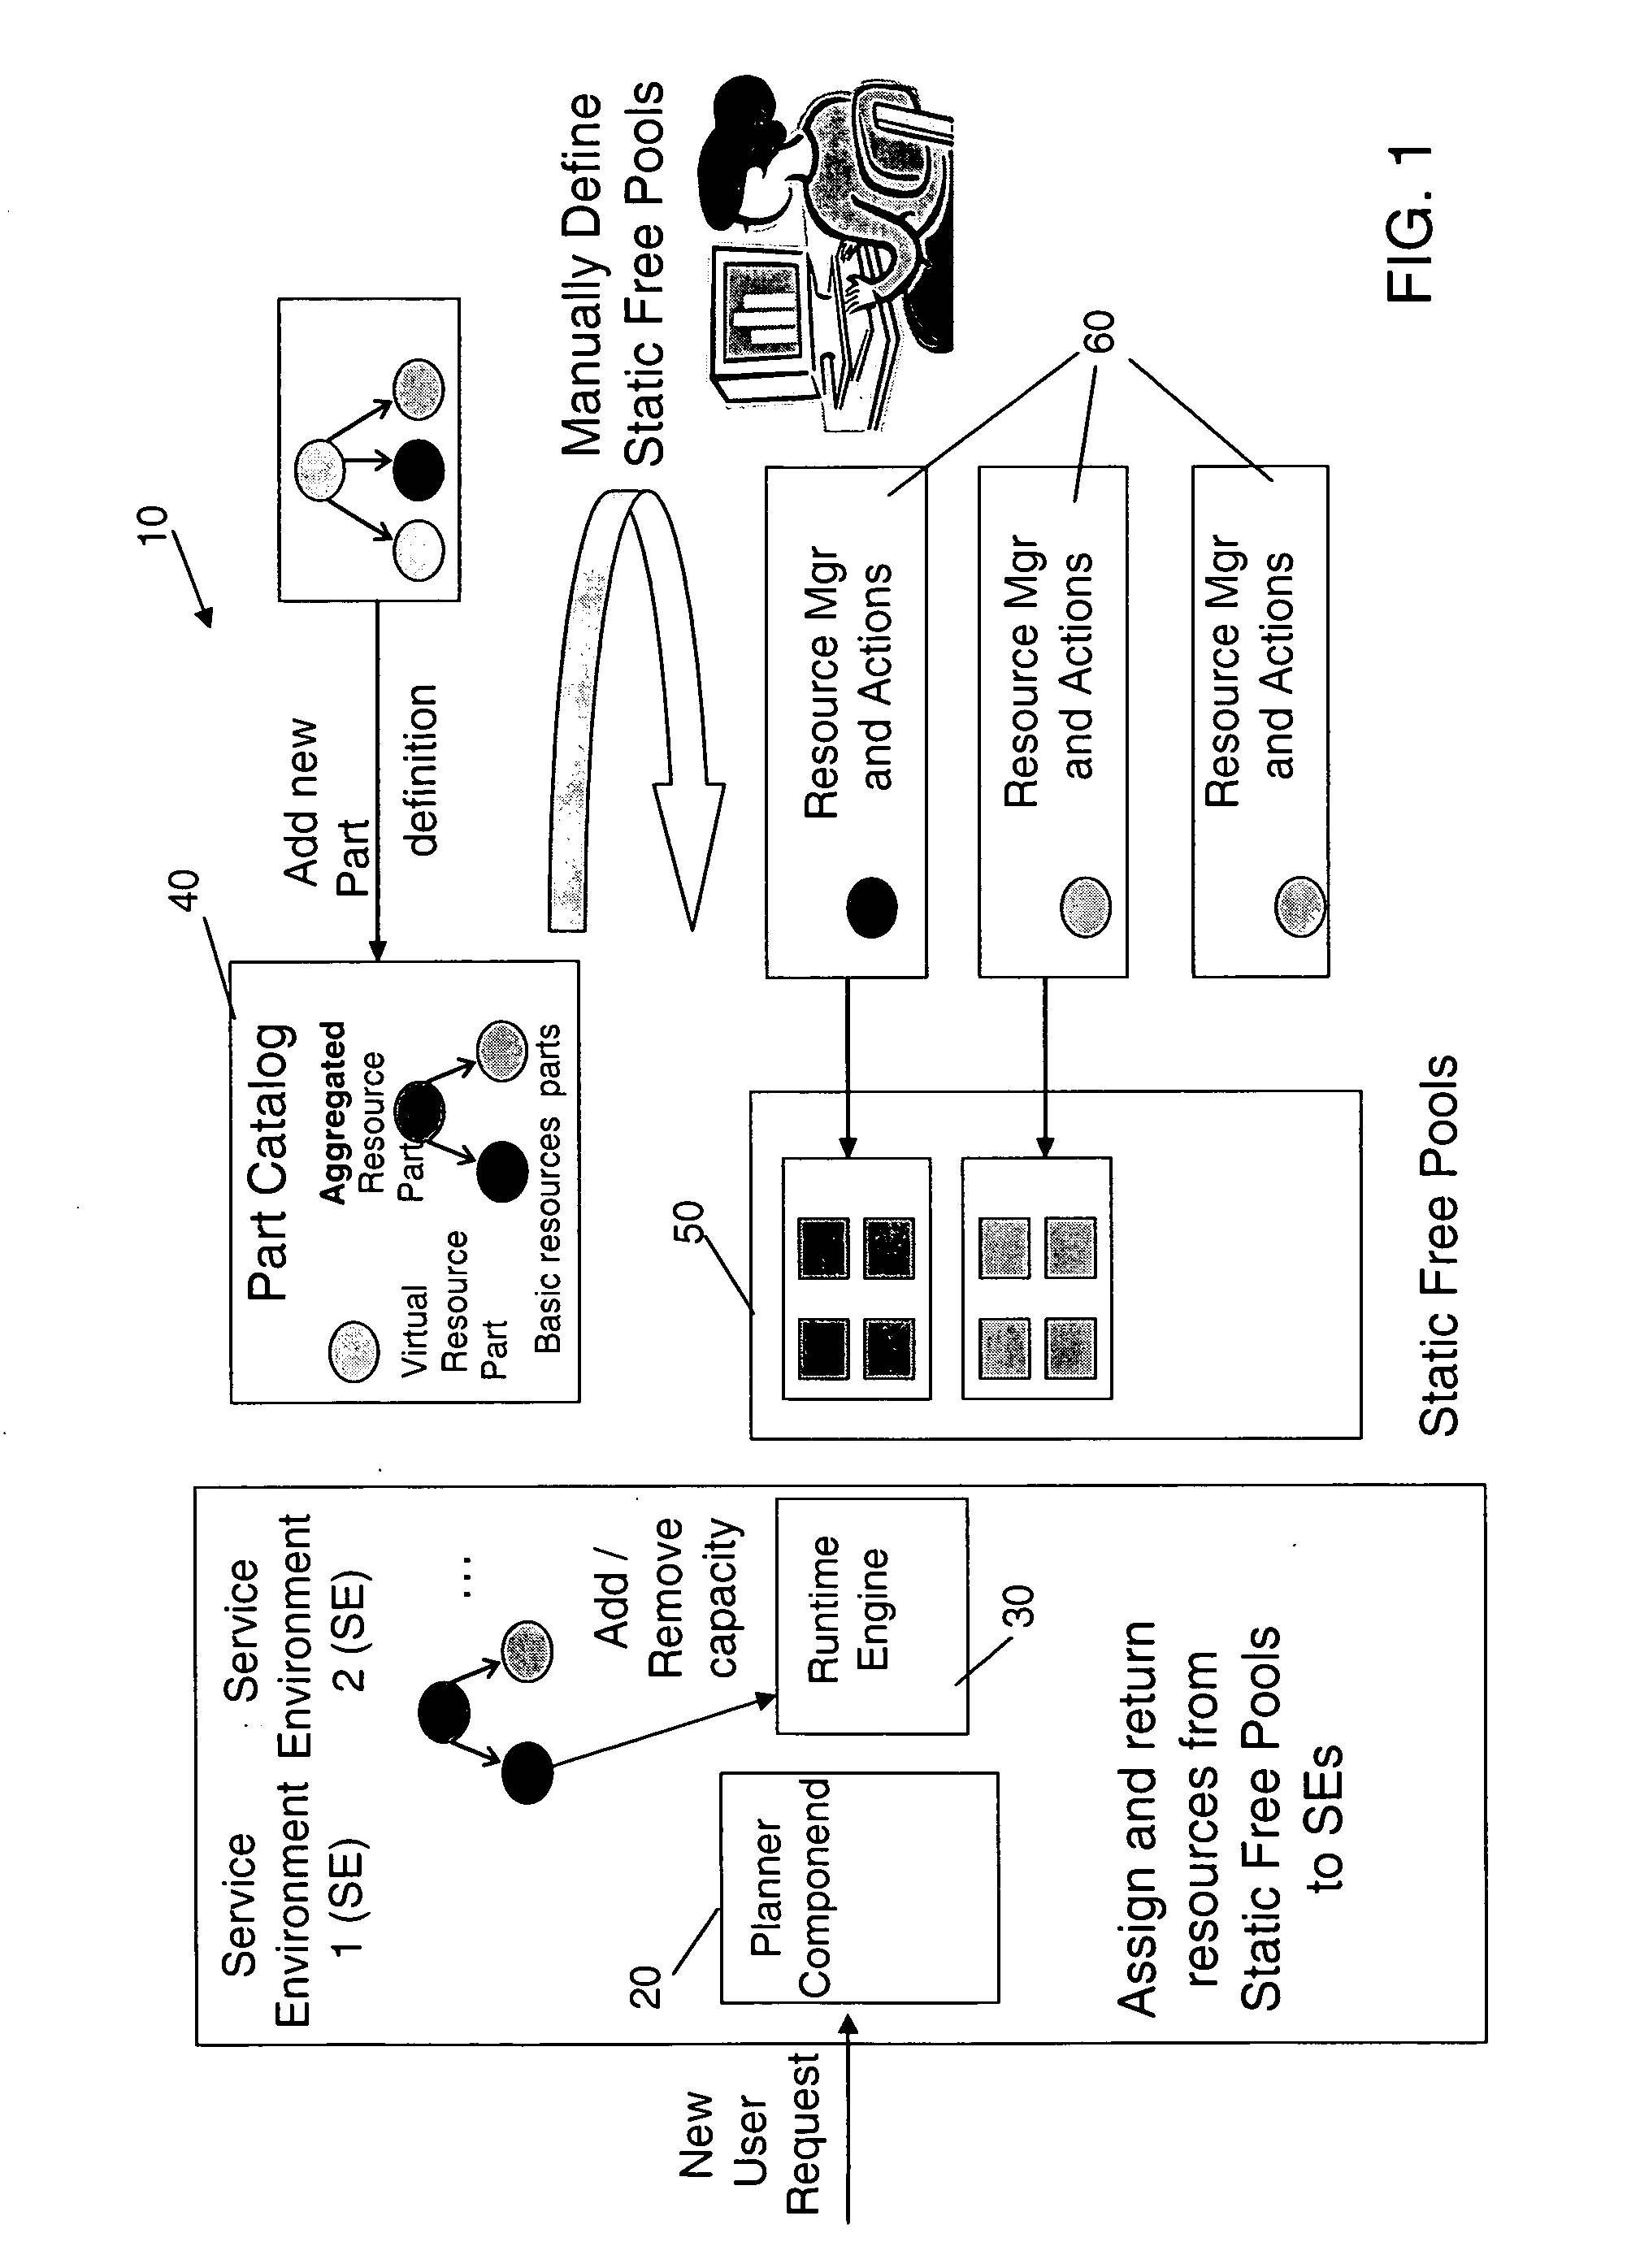 System, method and computer program product for provisioning of resources and service environments